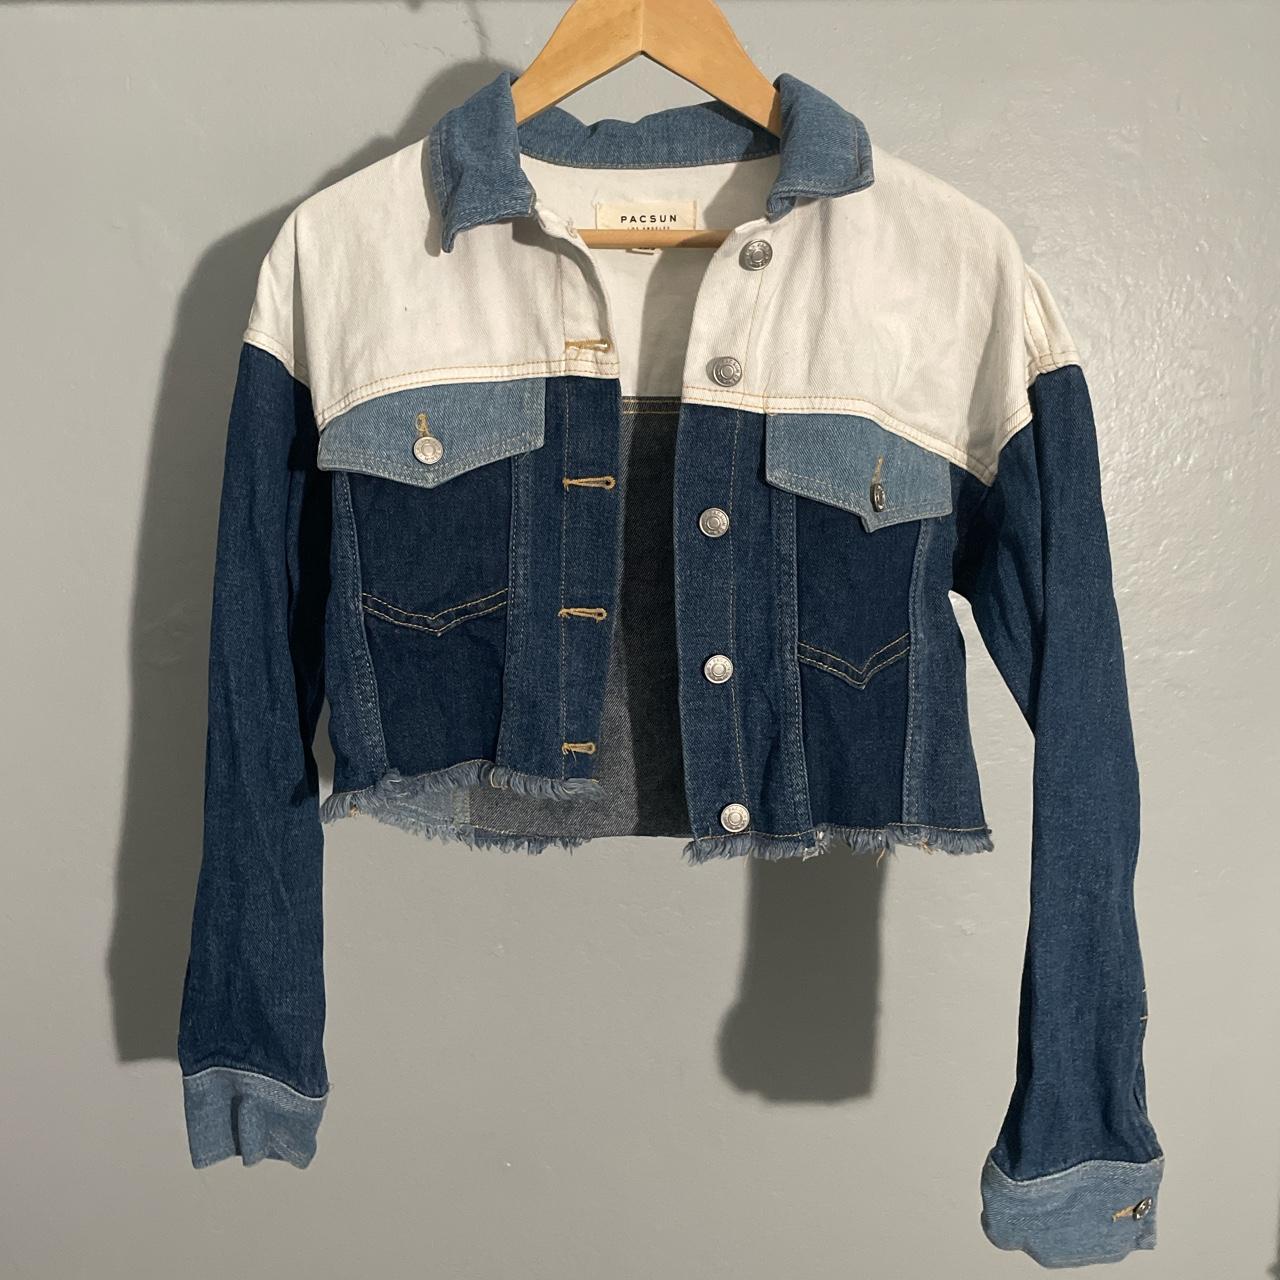 PacSun Women's White and Blue Jacket